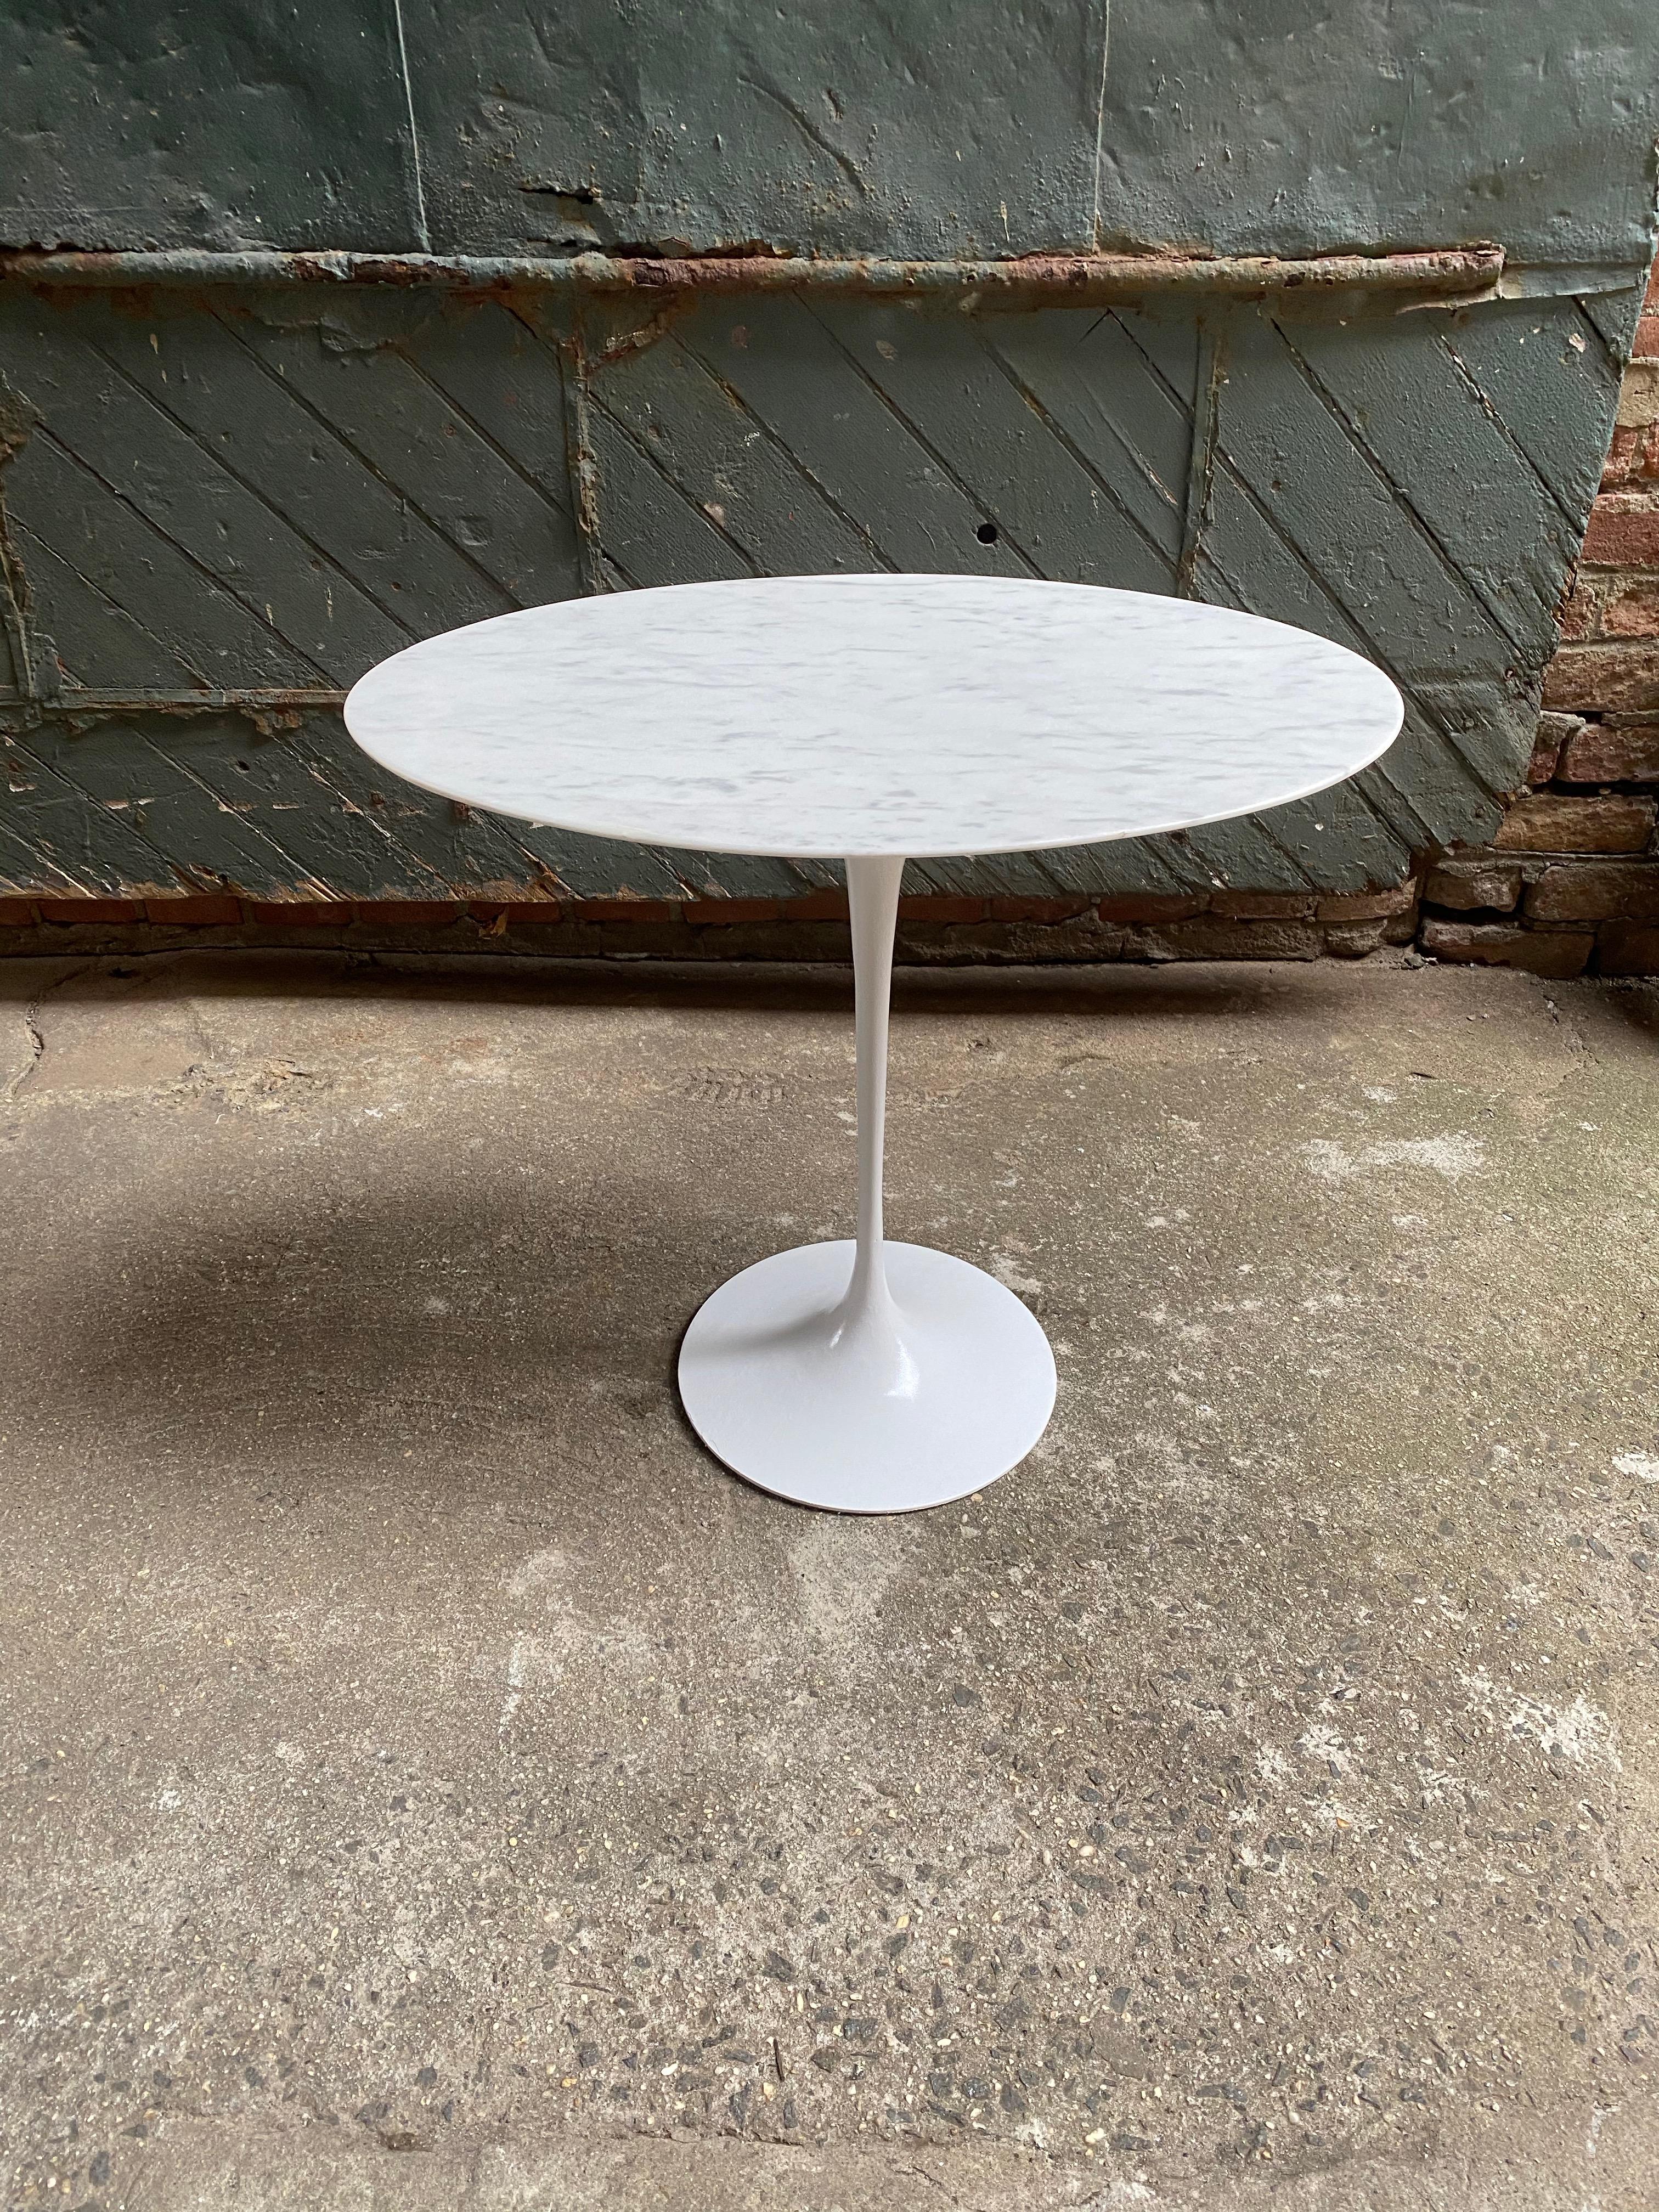 Eero Saarinen for Knoll ovoid white marble top tulip base end table. White bevel edge marble with gray veining. A nice example originally purchased in 1968. 

The oval marble top measures 15